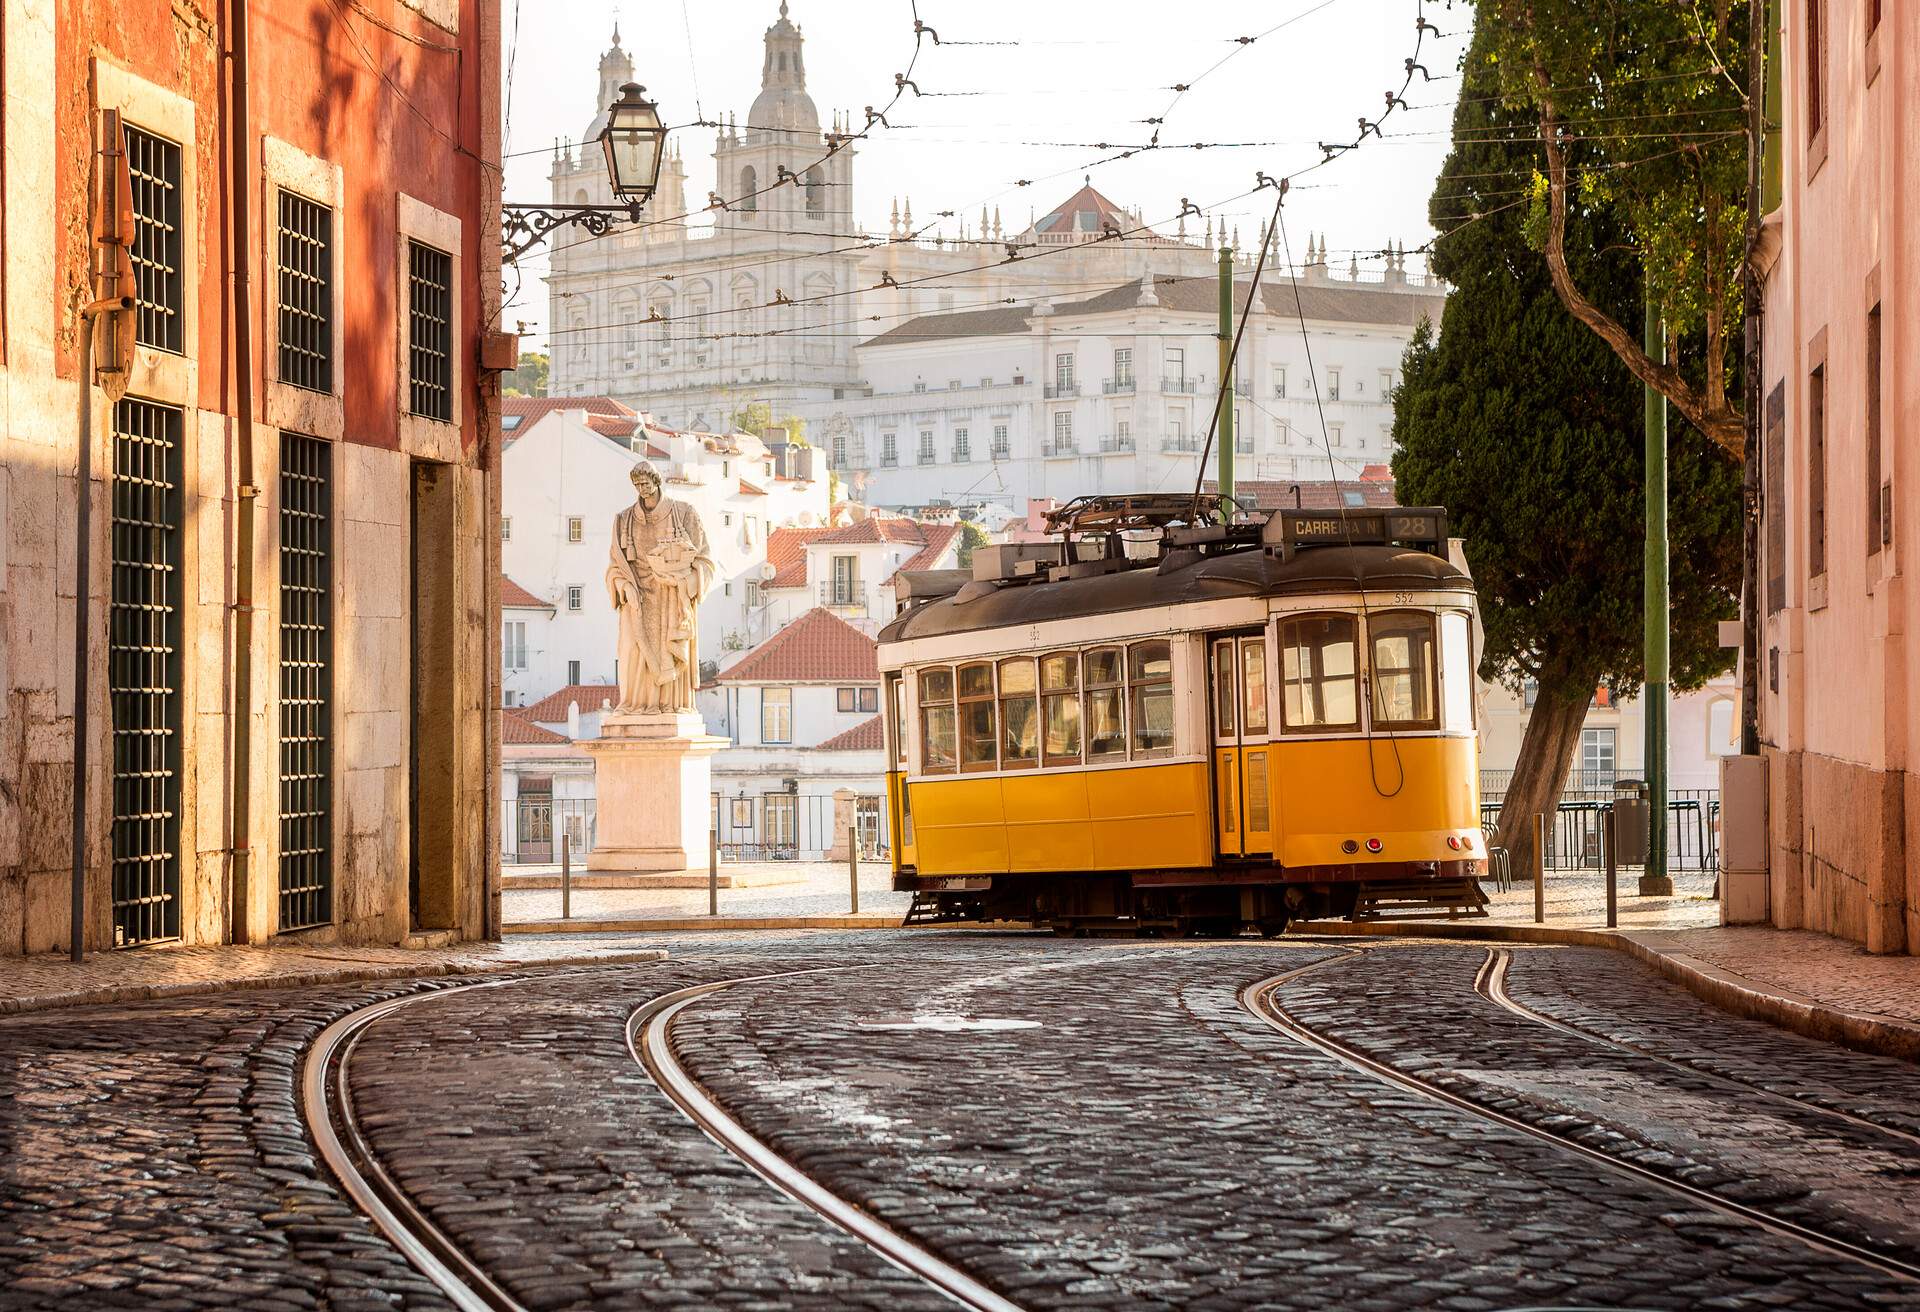 A yellow tram making its way into the city, passing by historic buildings.